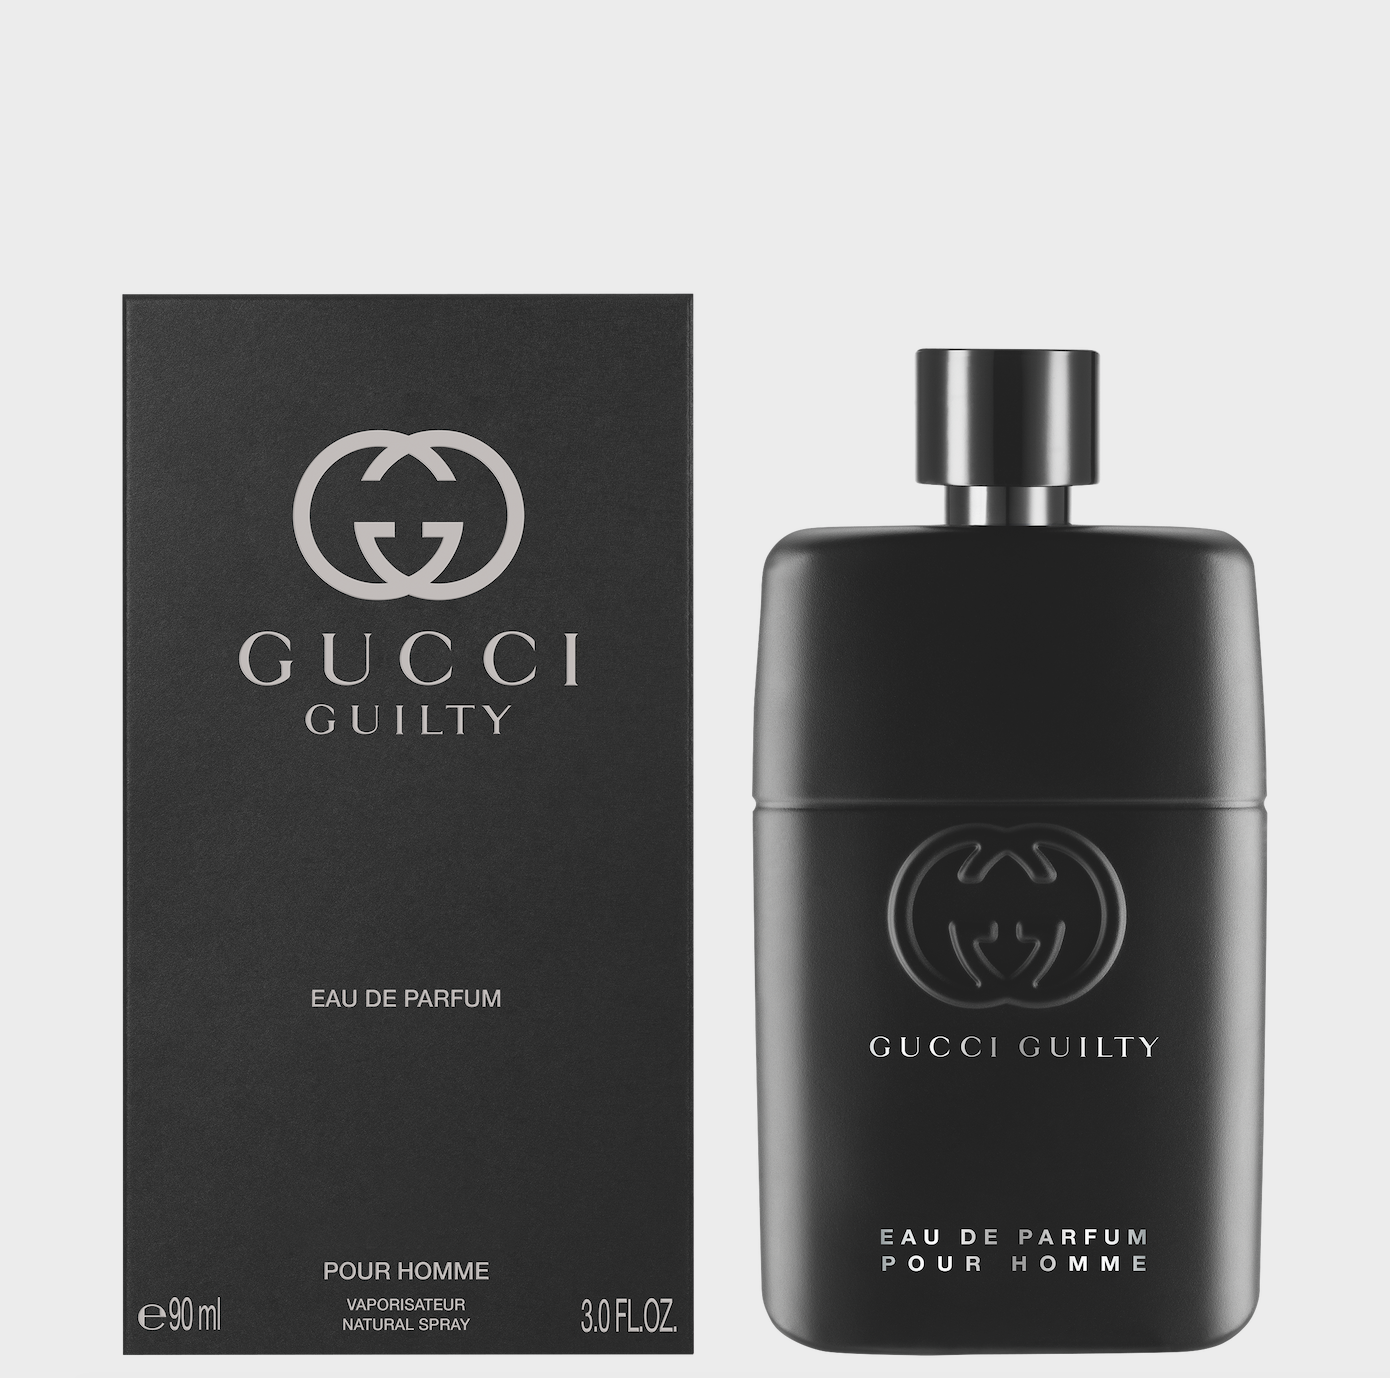 gucci guilty cologne price